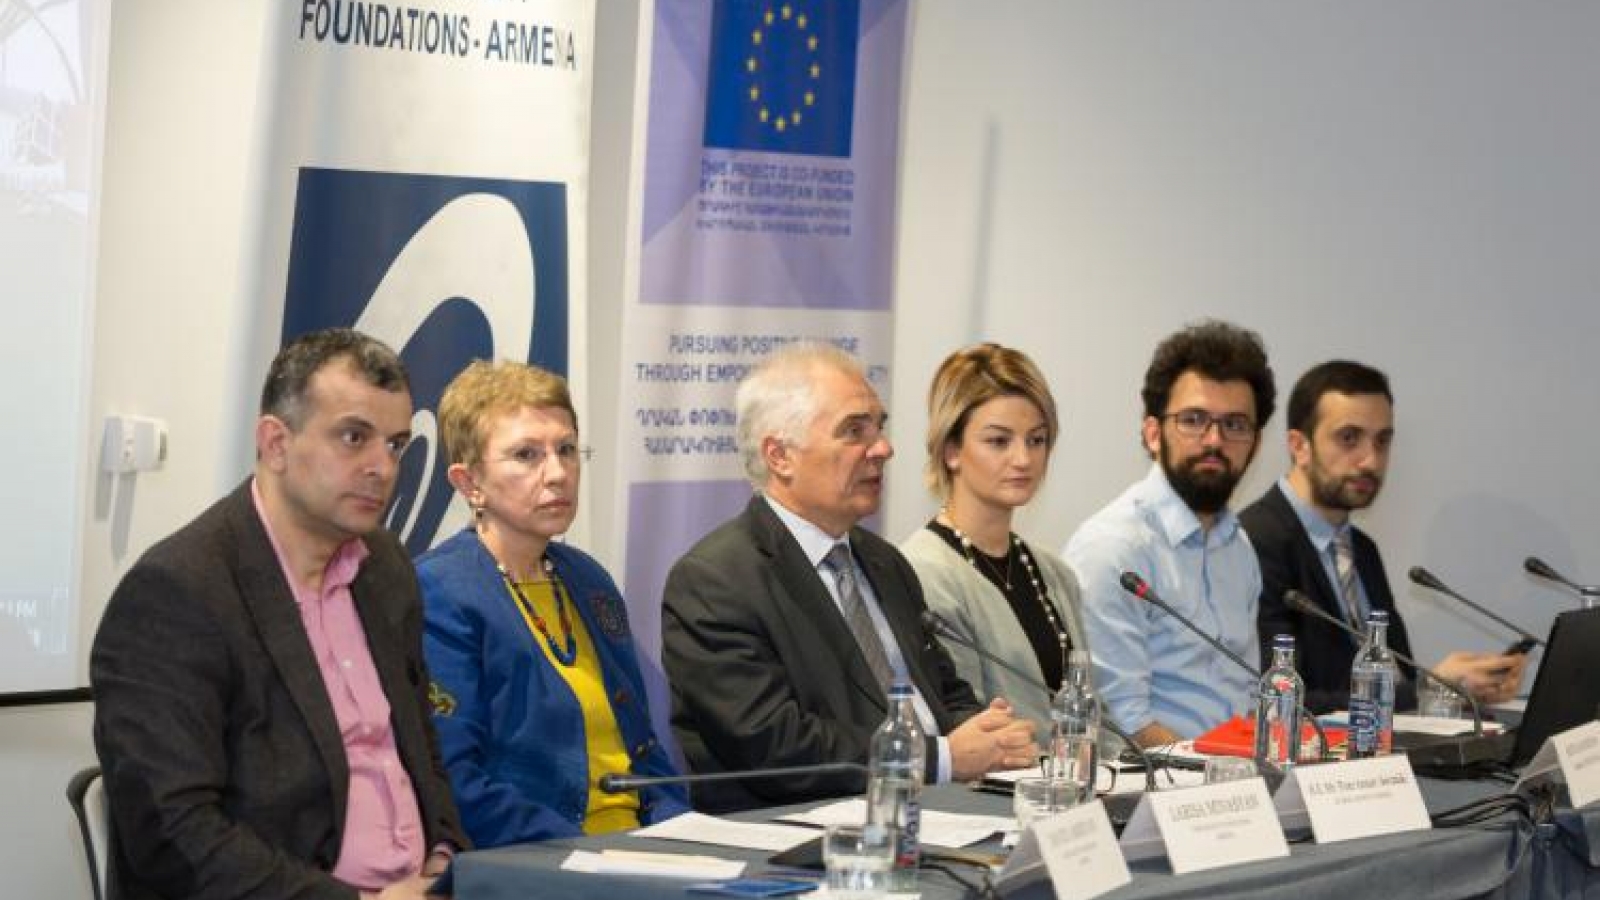 EU supports Armenian civil society to bring positive changes in the country